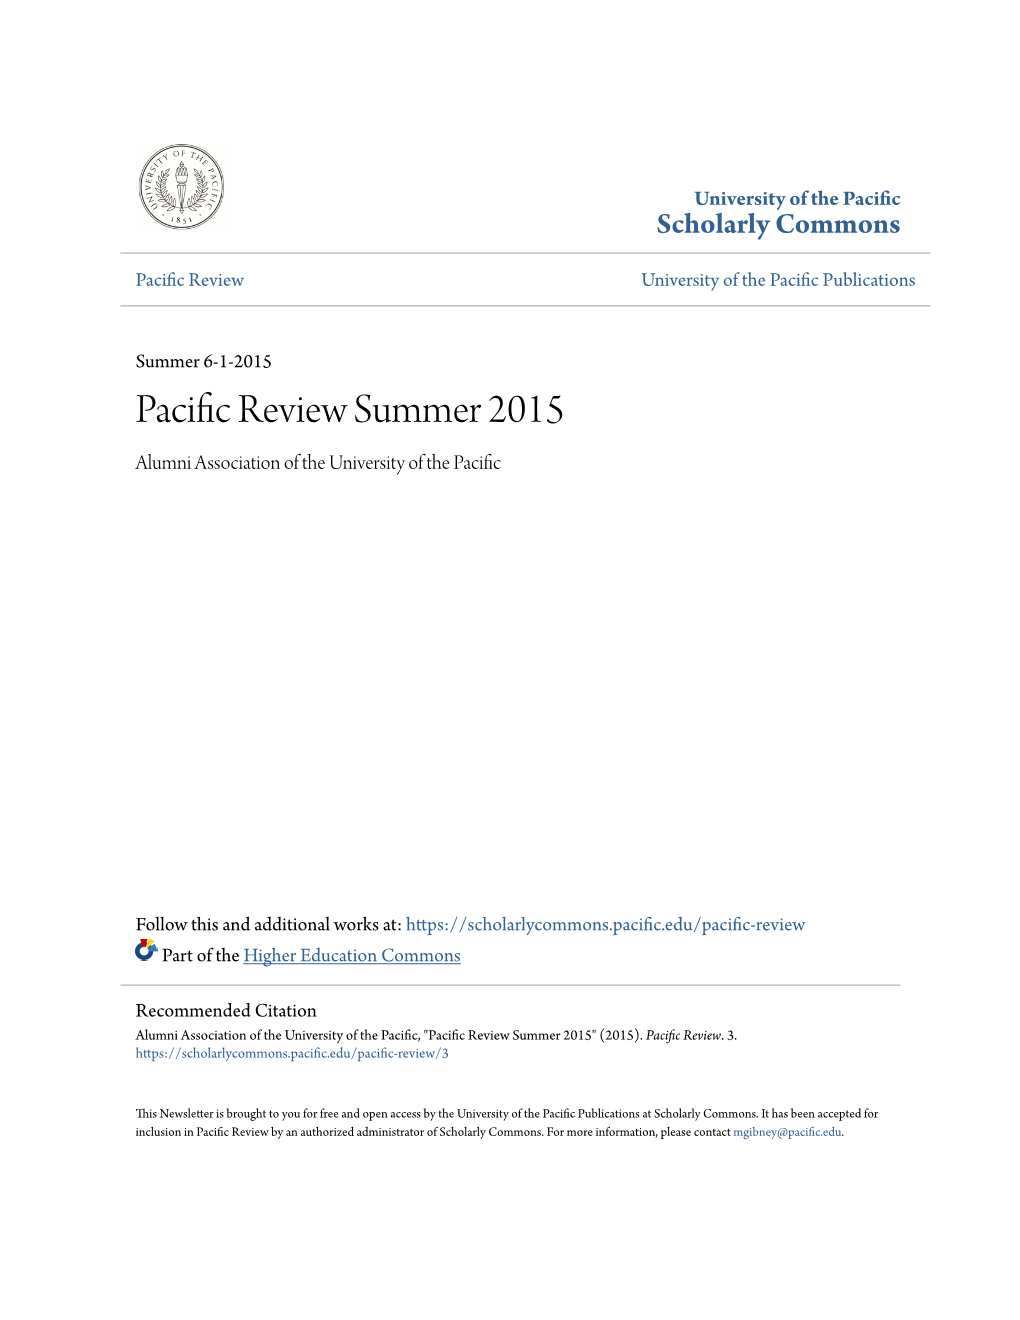 Pacific Review Summer 2015 Alumni Association of the University of the Pacific